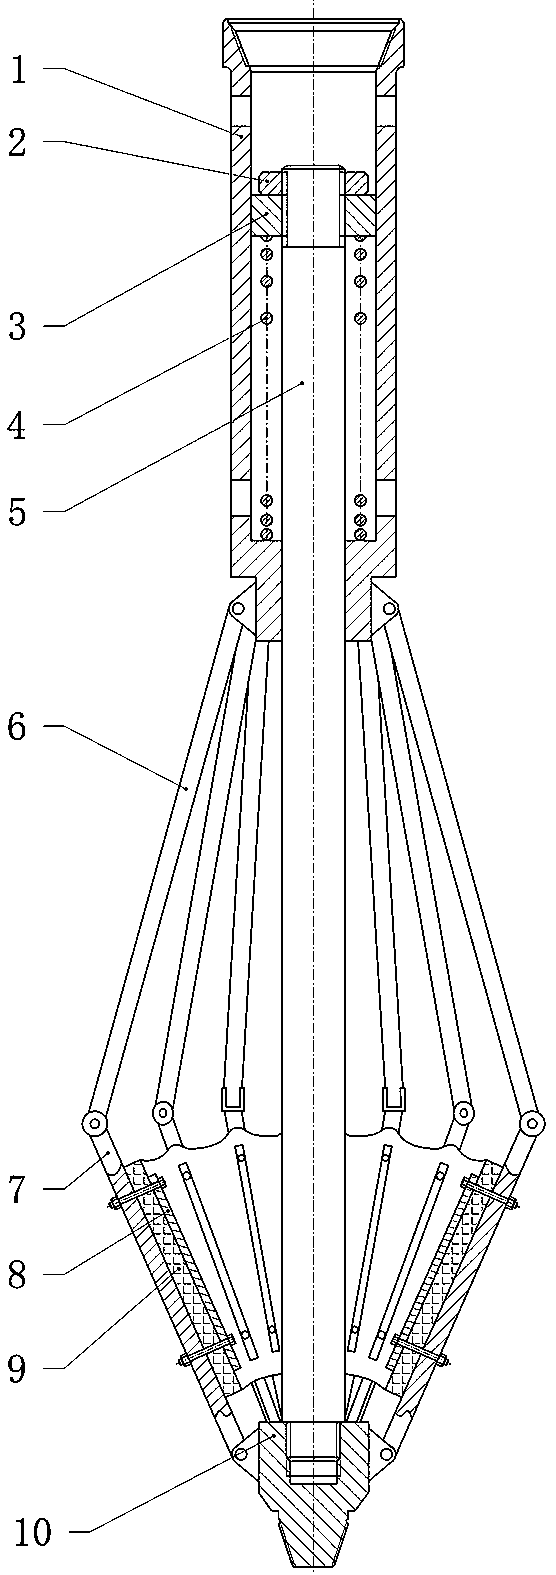 A wire rope feeding device